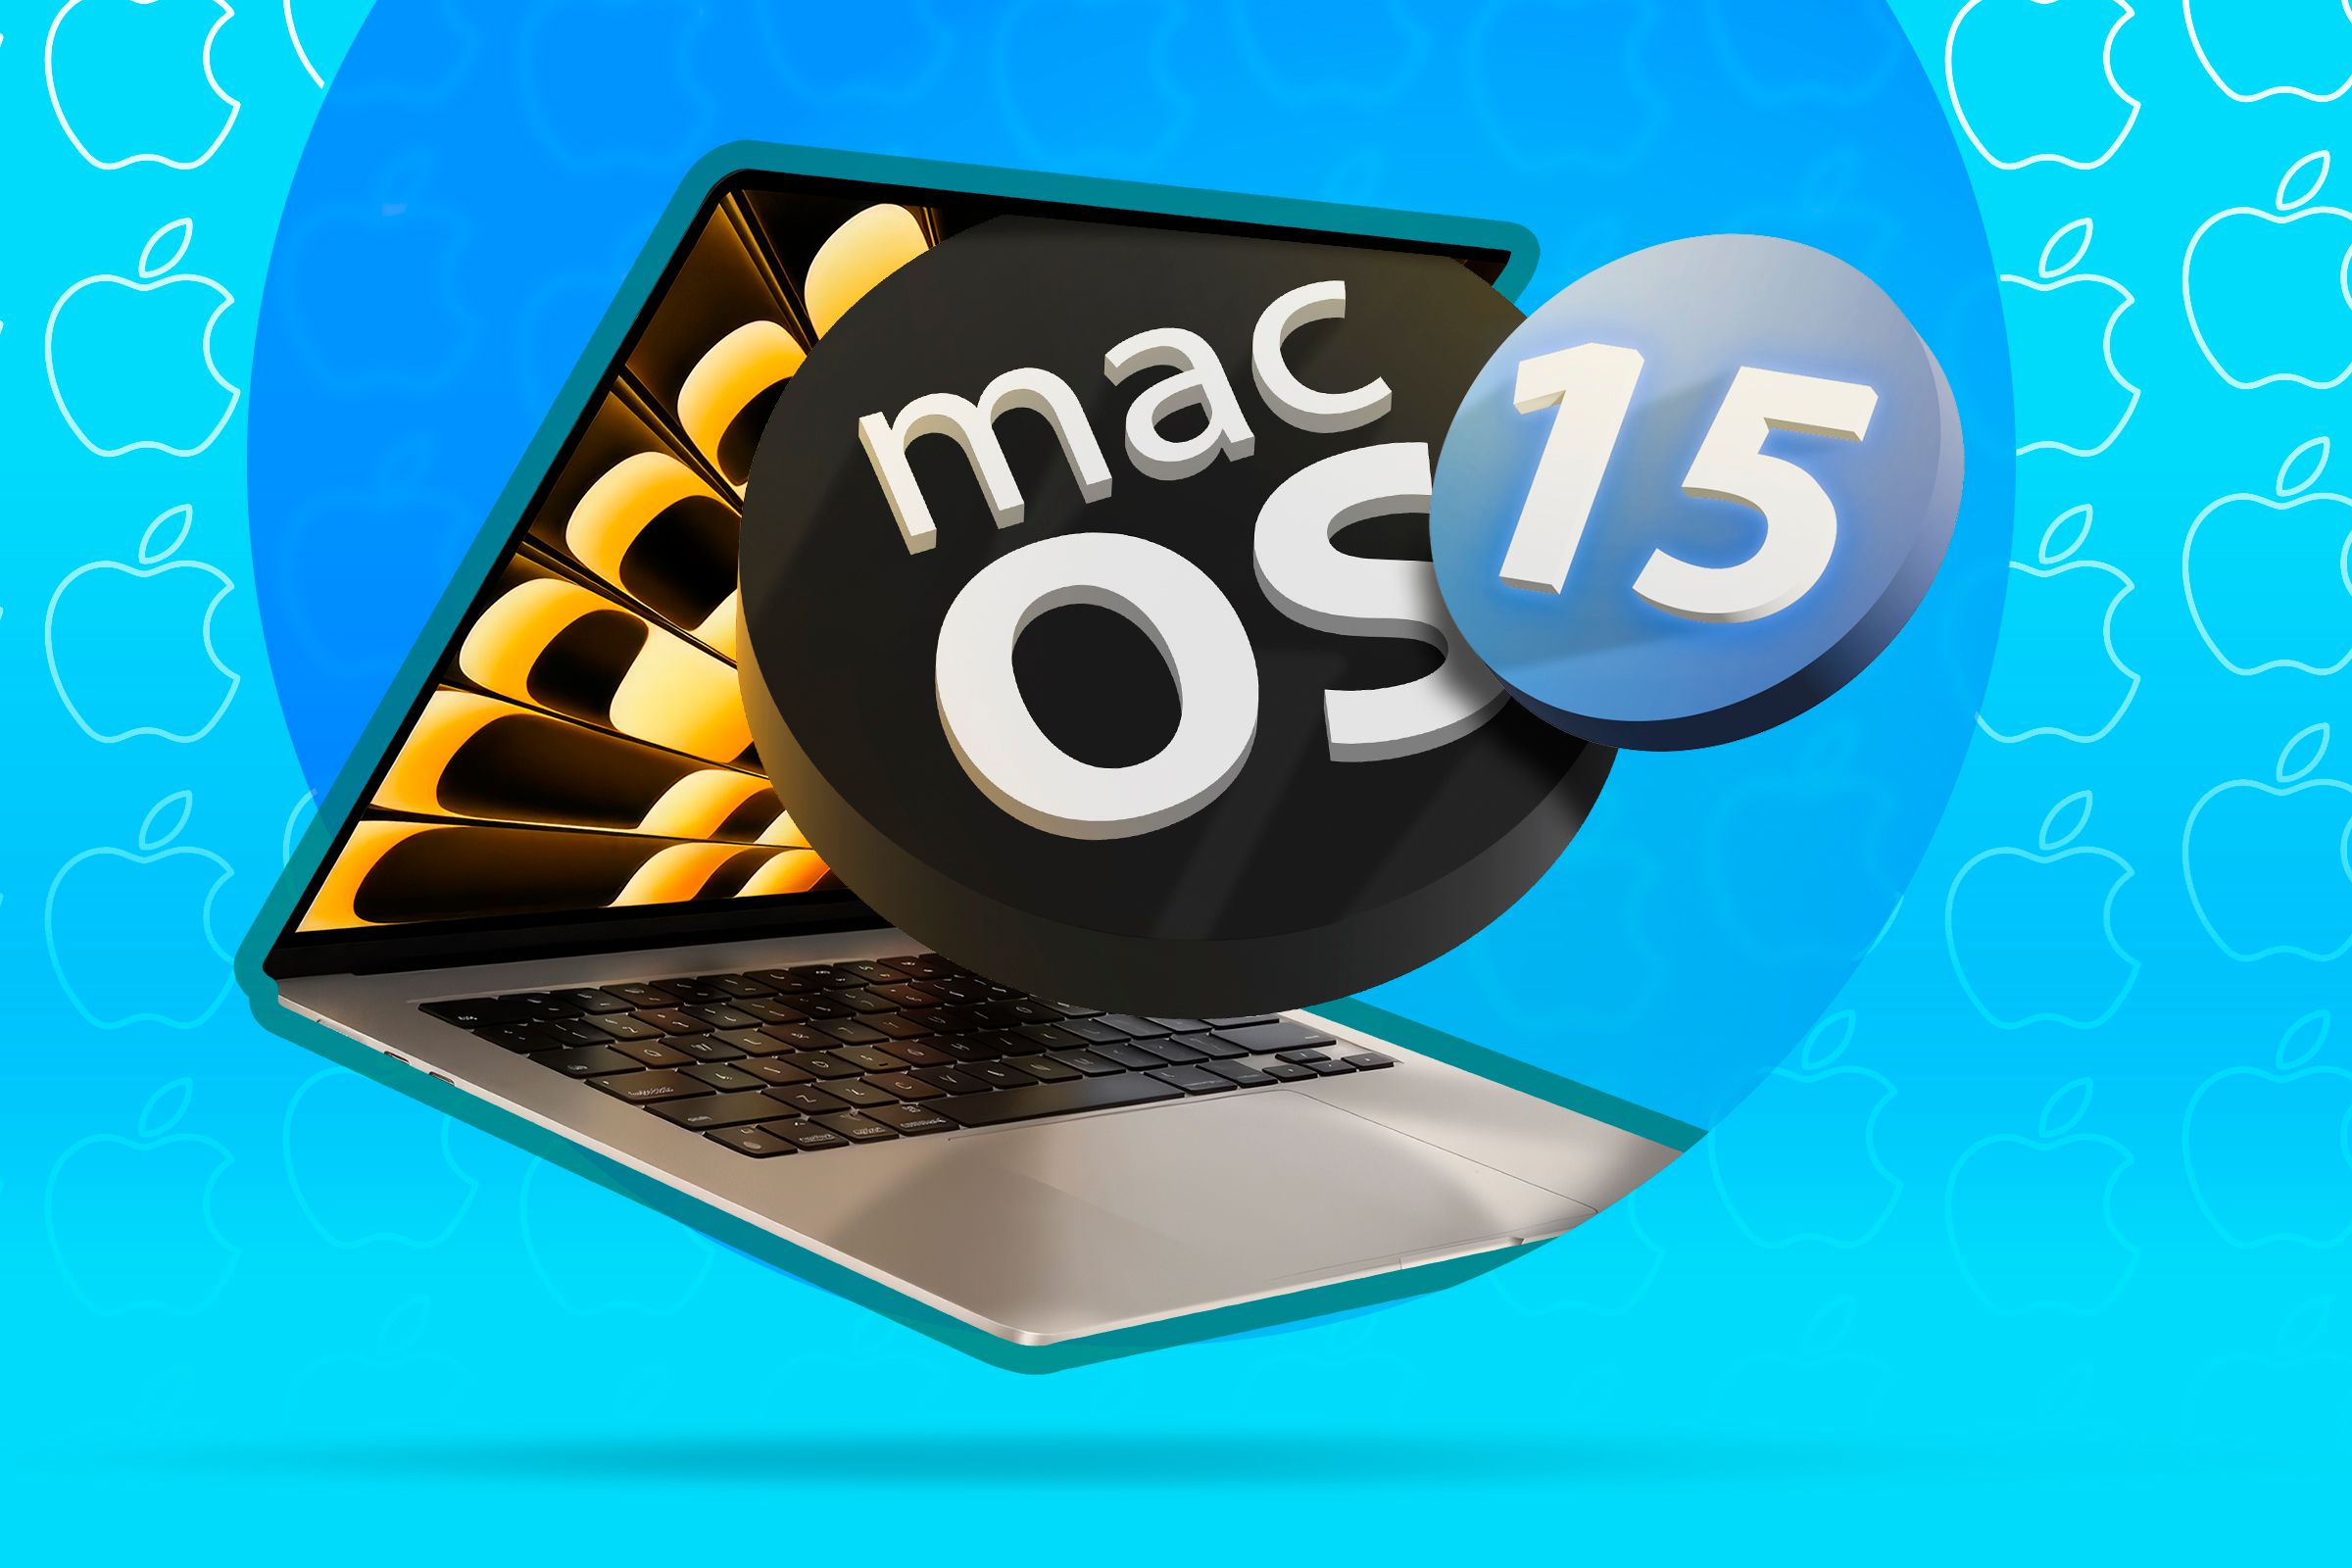 A Macbook with 'MacOs 15' coming out of the screen.